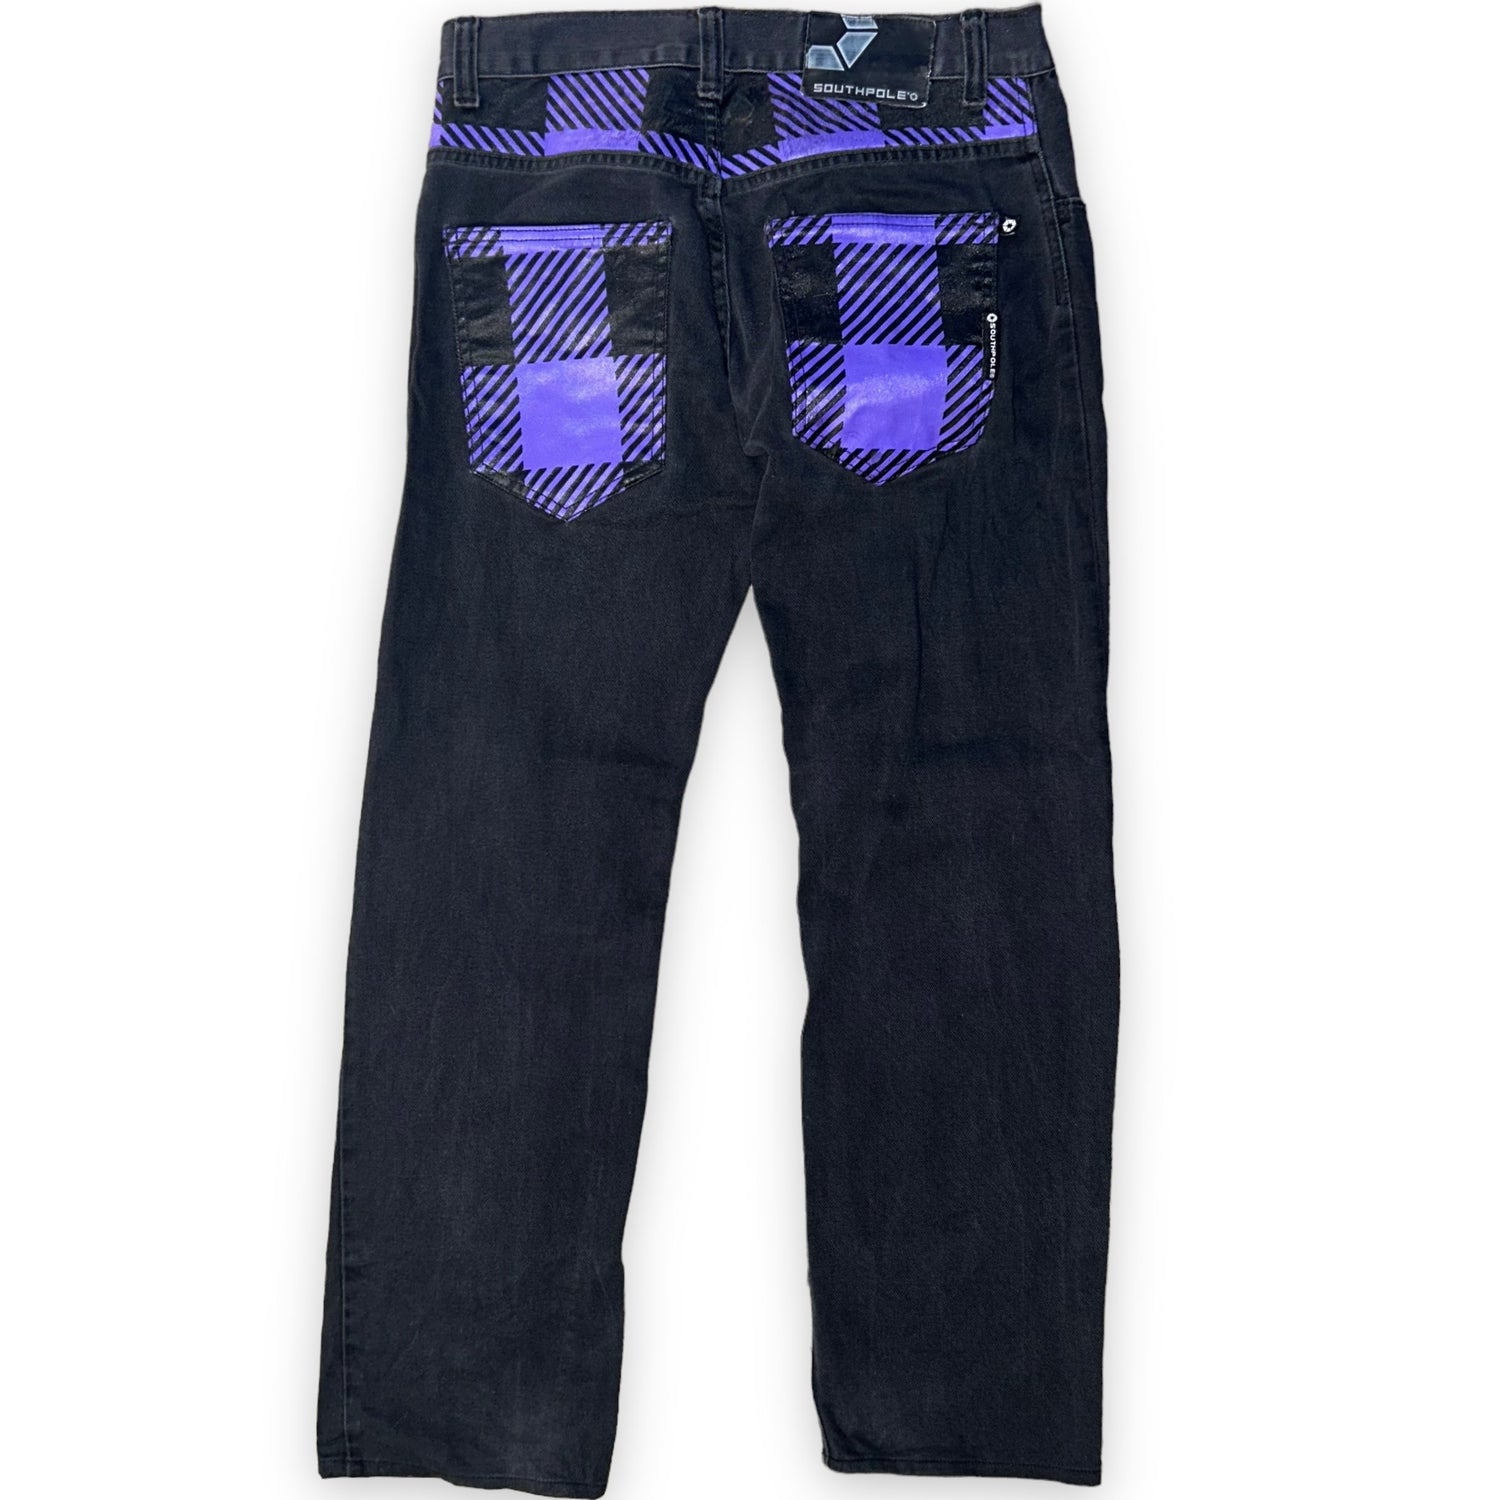 Jeans SouthPole (32 USA M) - oldstyleclothing